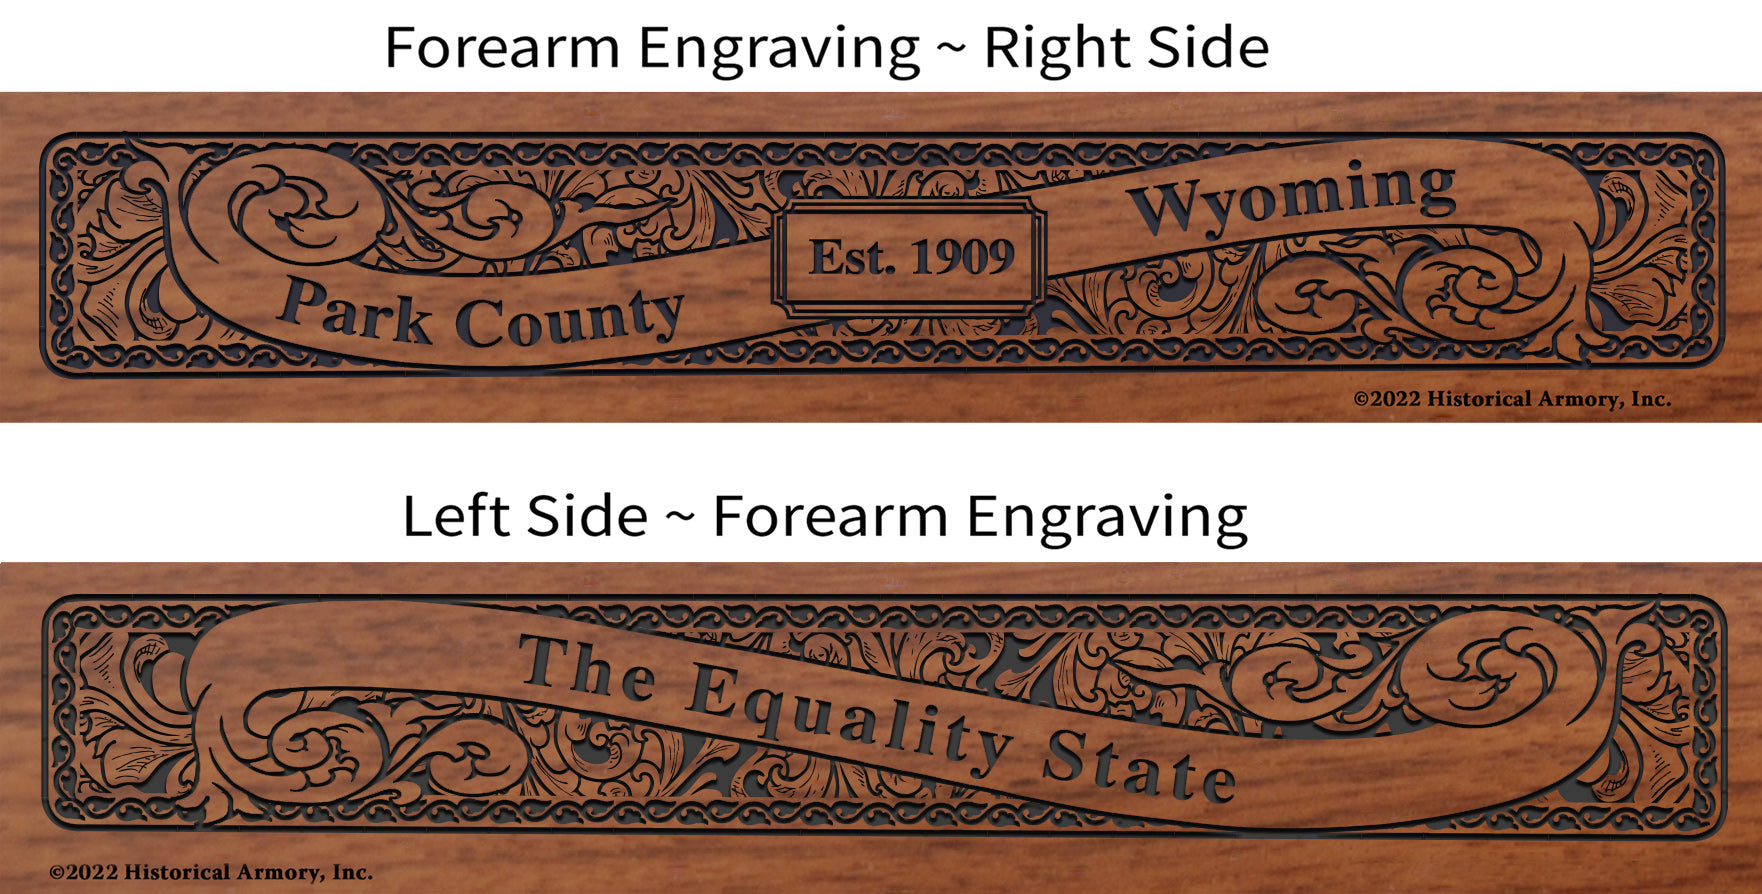 Park County Wyoming Engraved Rifle Forearm